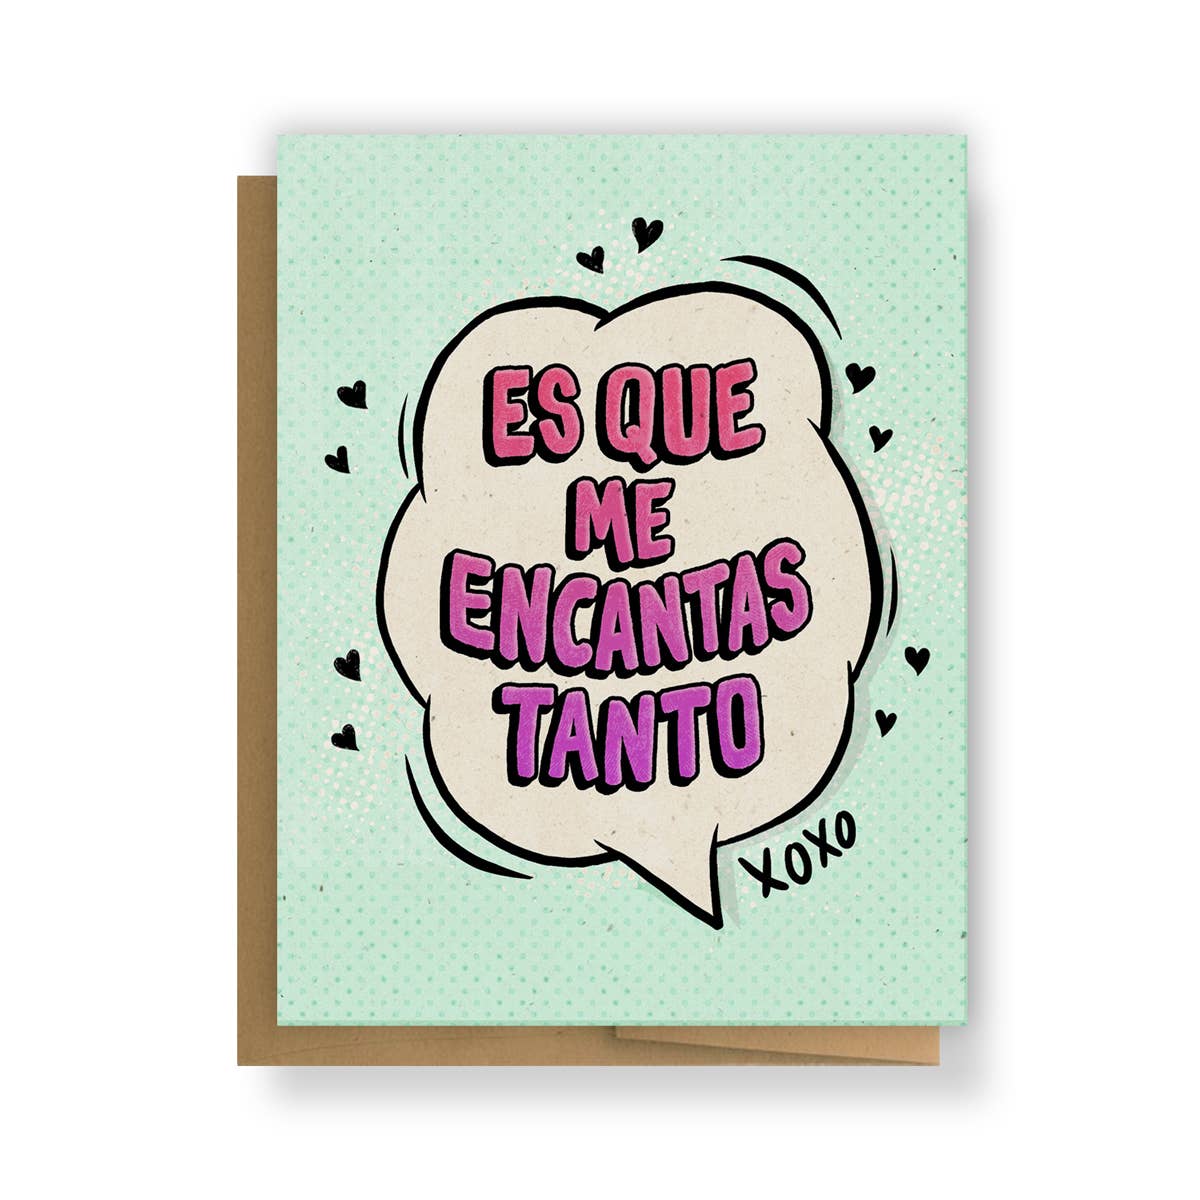 Greeting Cards in English and Spanish by Erica Alfaro